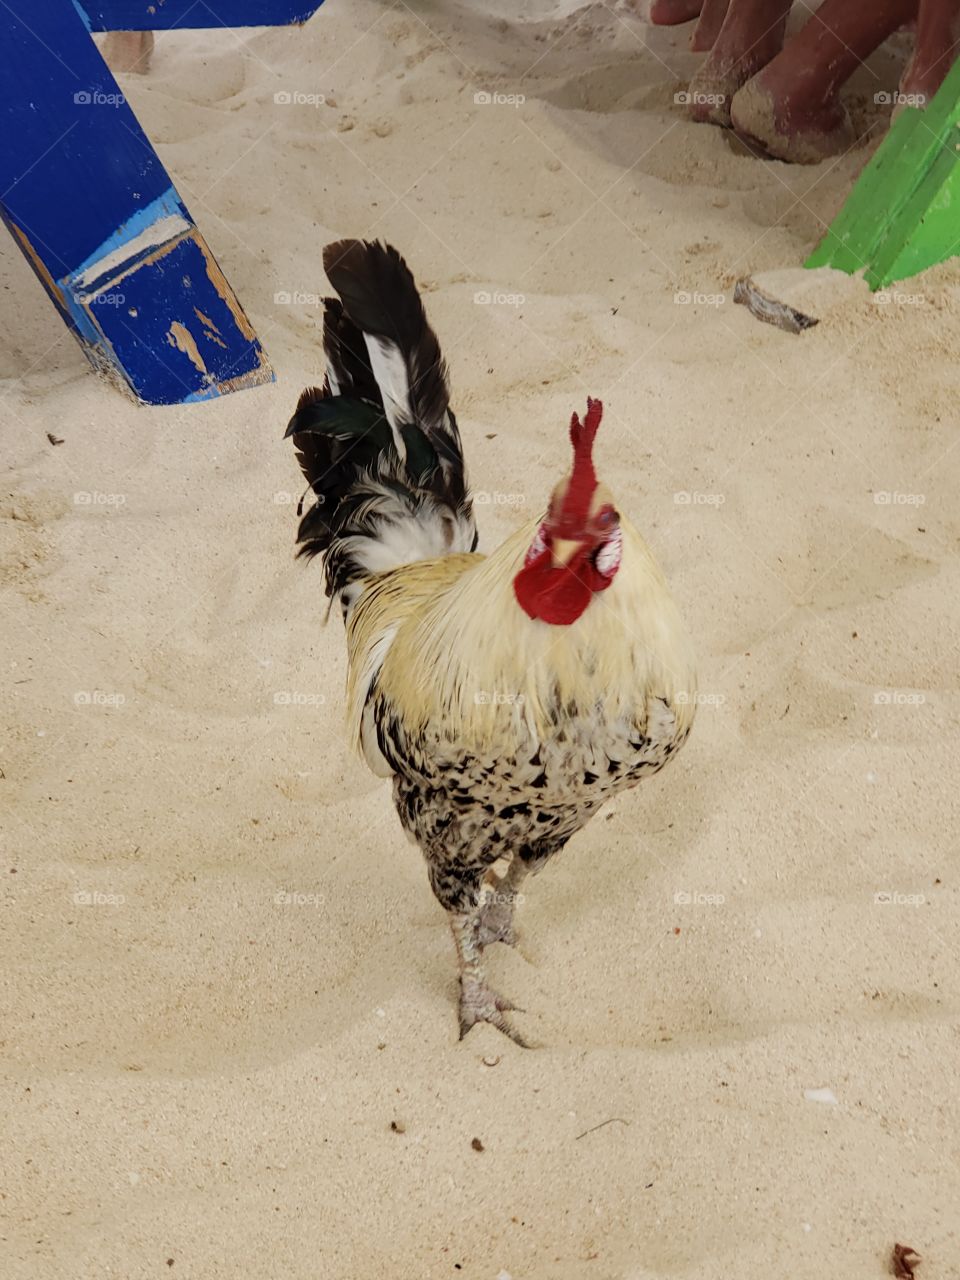 Yes, That is a ROOSTER